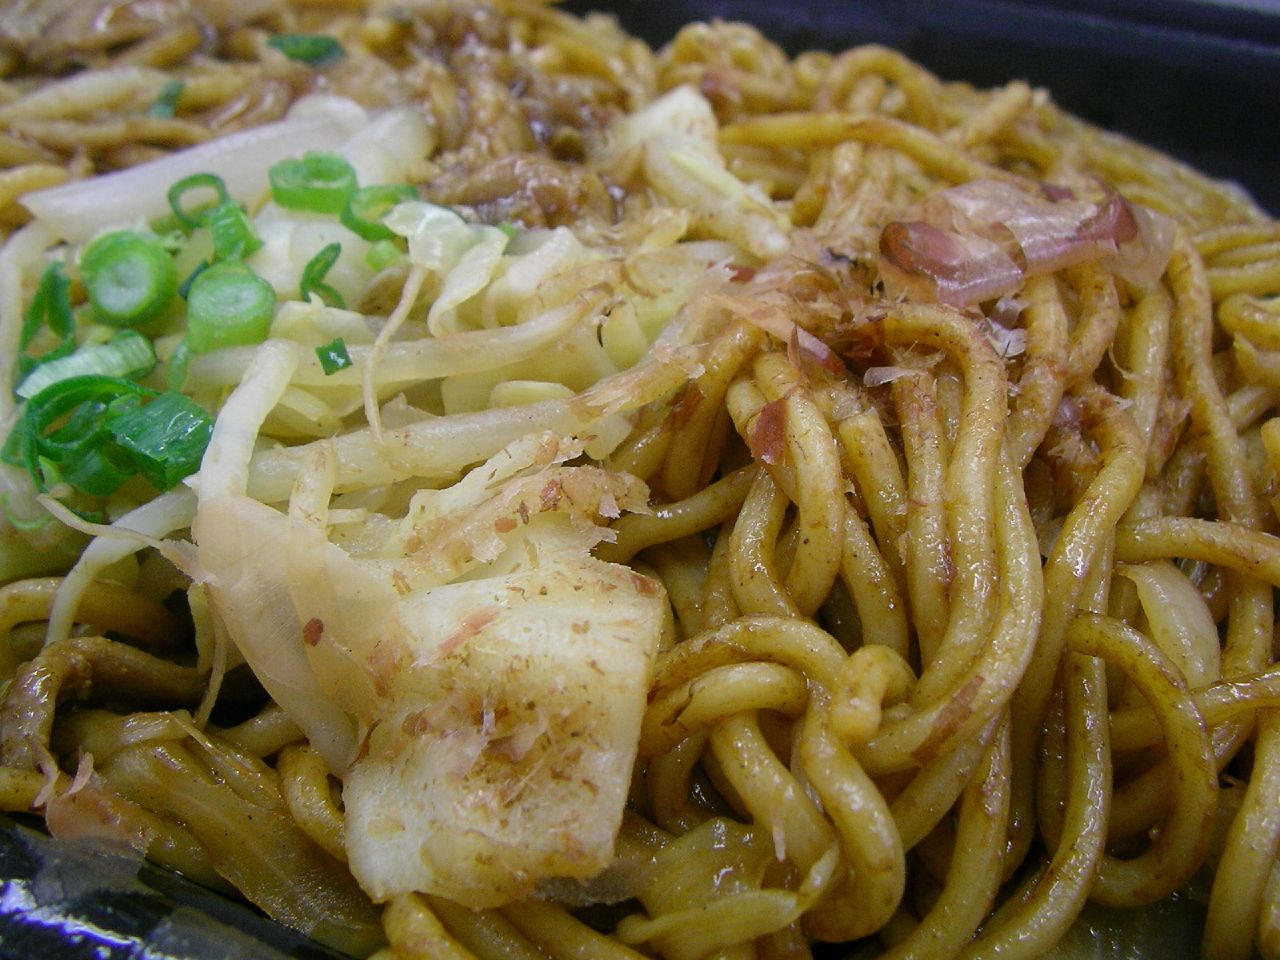 a dish of noodles with shrimp and vegetables